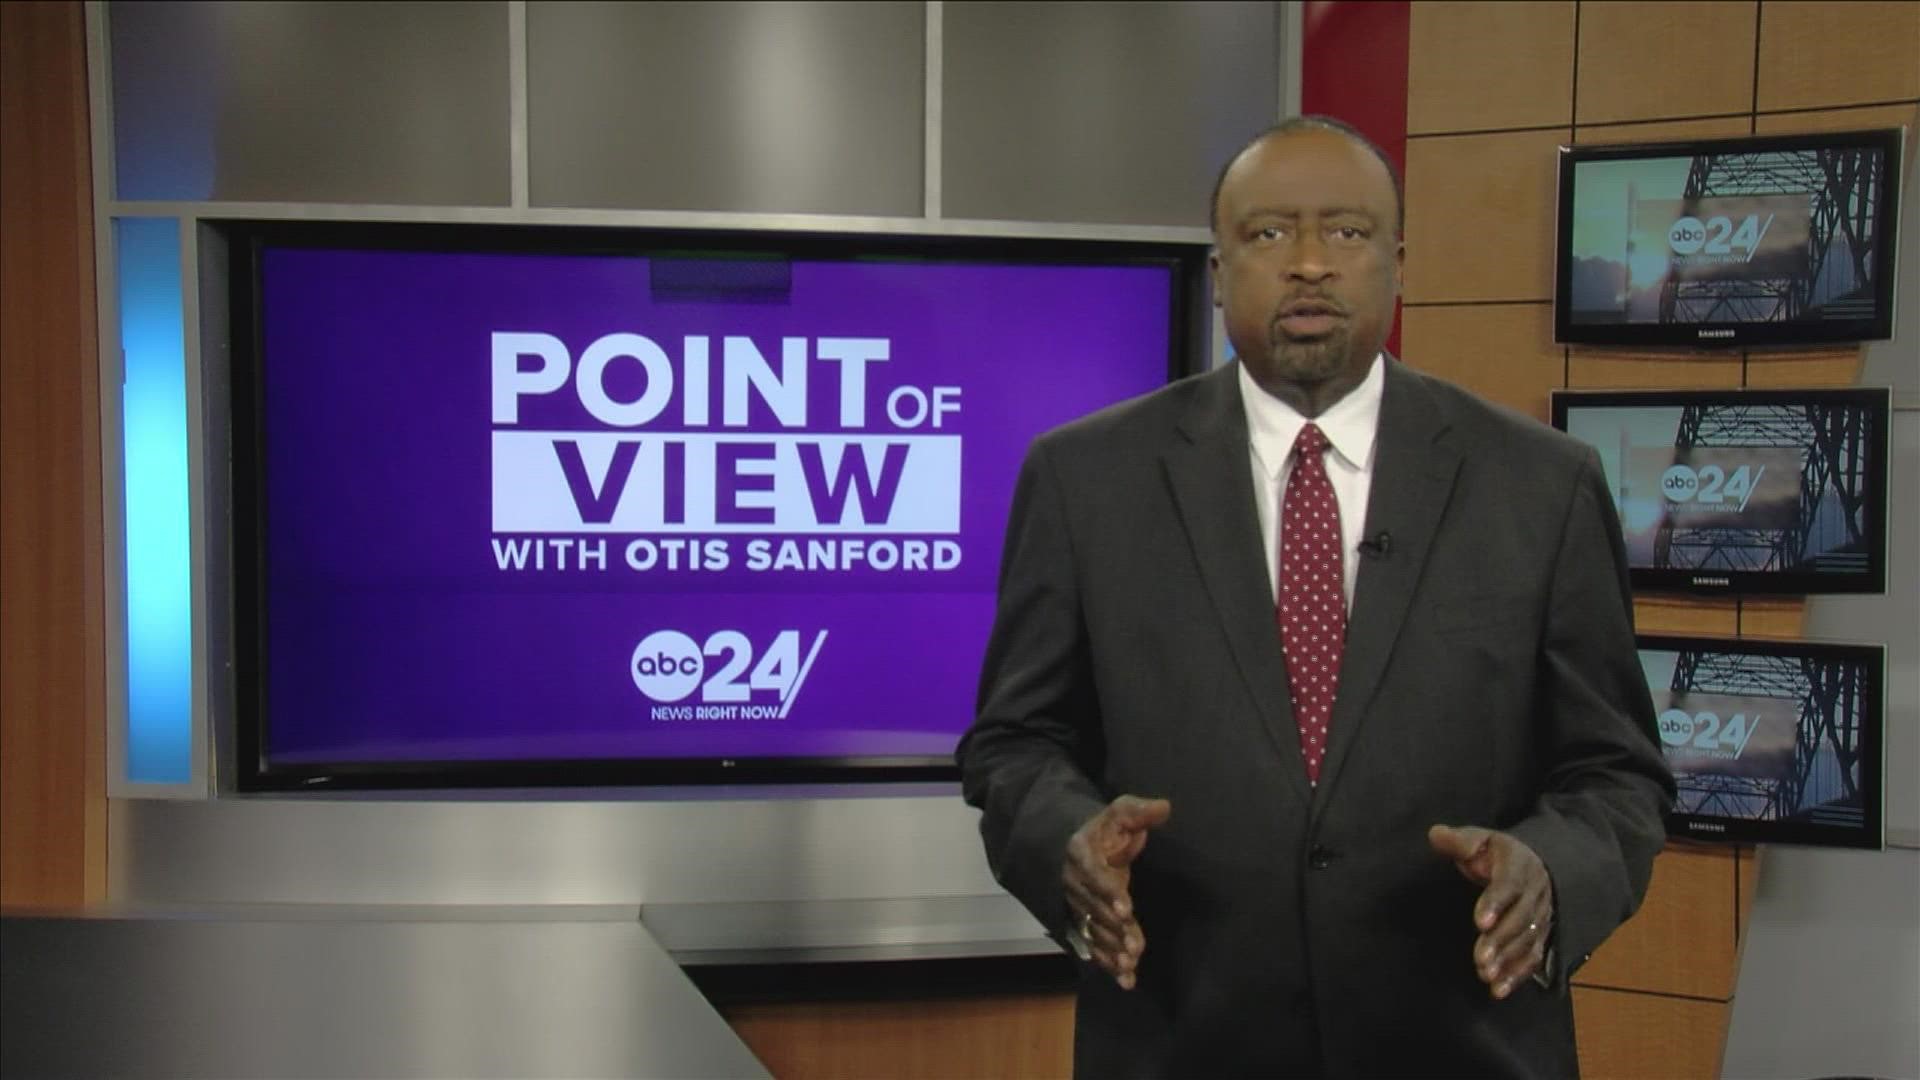 ABC24 political analyst and commentator Otis Sanford shared his point of view on calls for the Police Chief and MSCS Superintendent to resign.